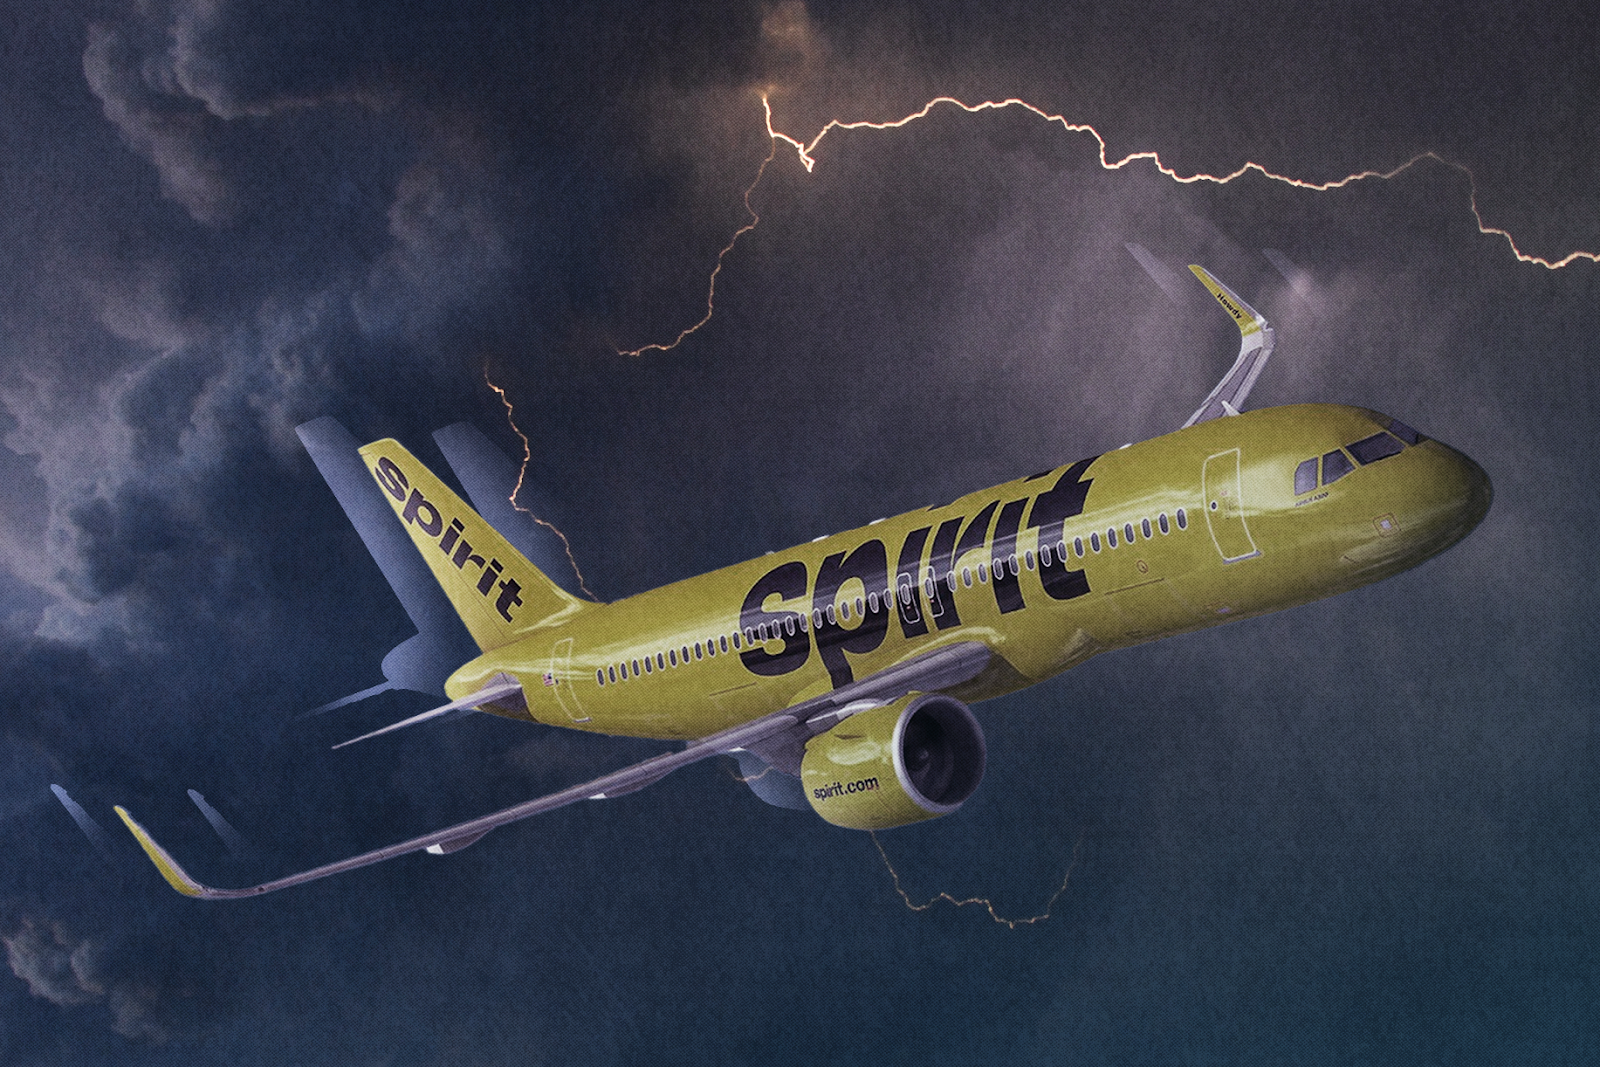 An illustration showing a Spirit Airlines plane flying through stormy skies.